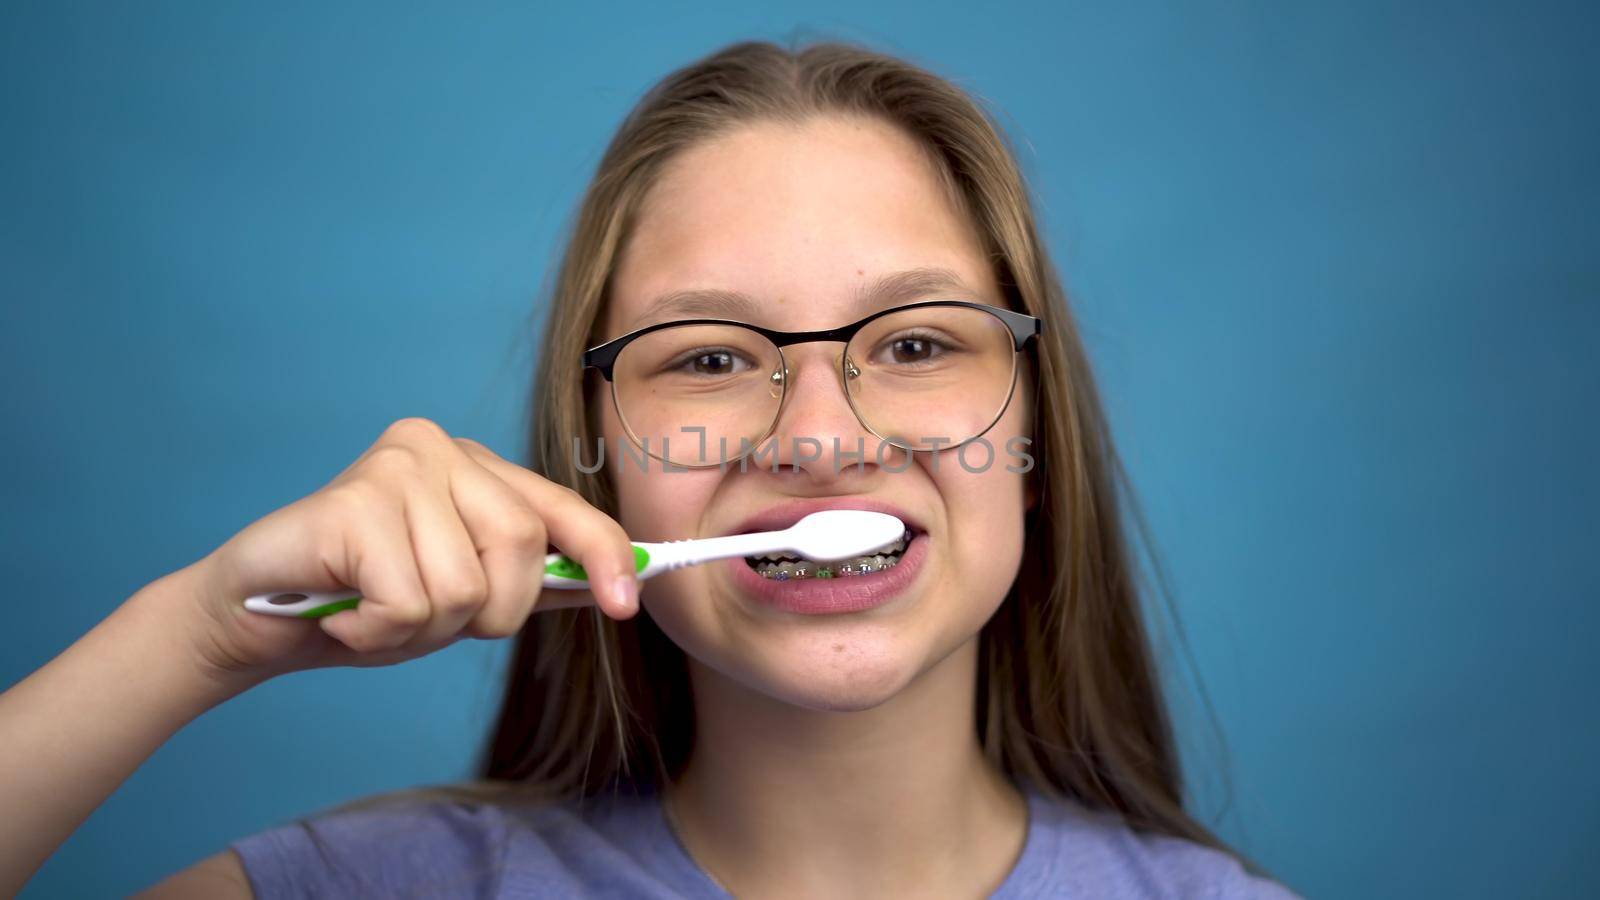 Girl with braces brush her teeth with a toothbrush closeup. A girl with colored braces on her teeth keeps her teeth clean. 4k